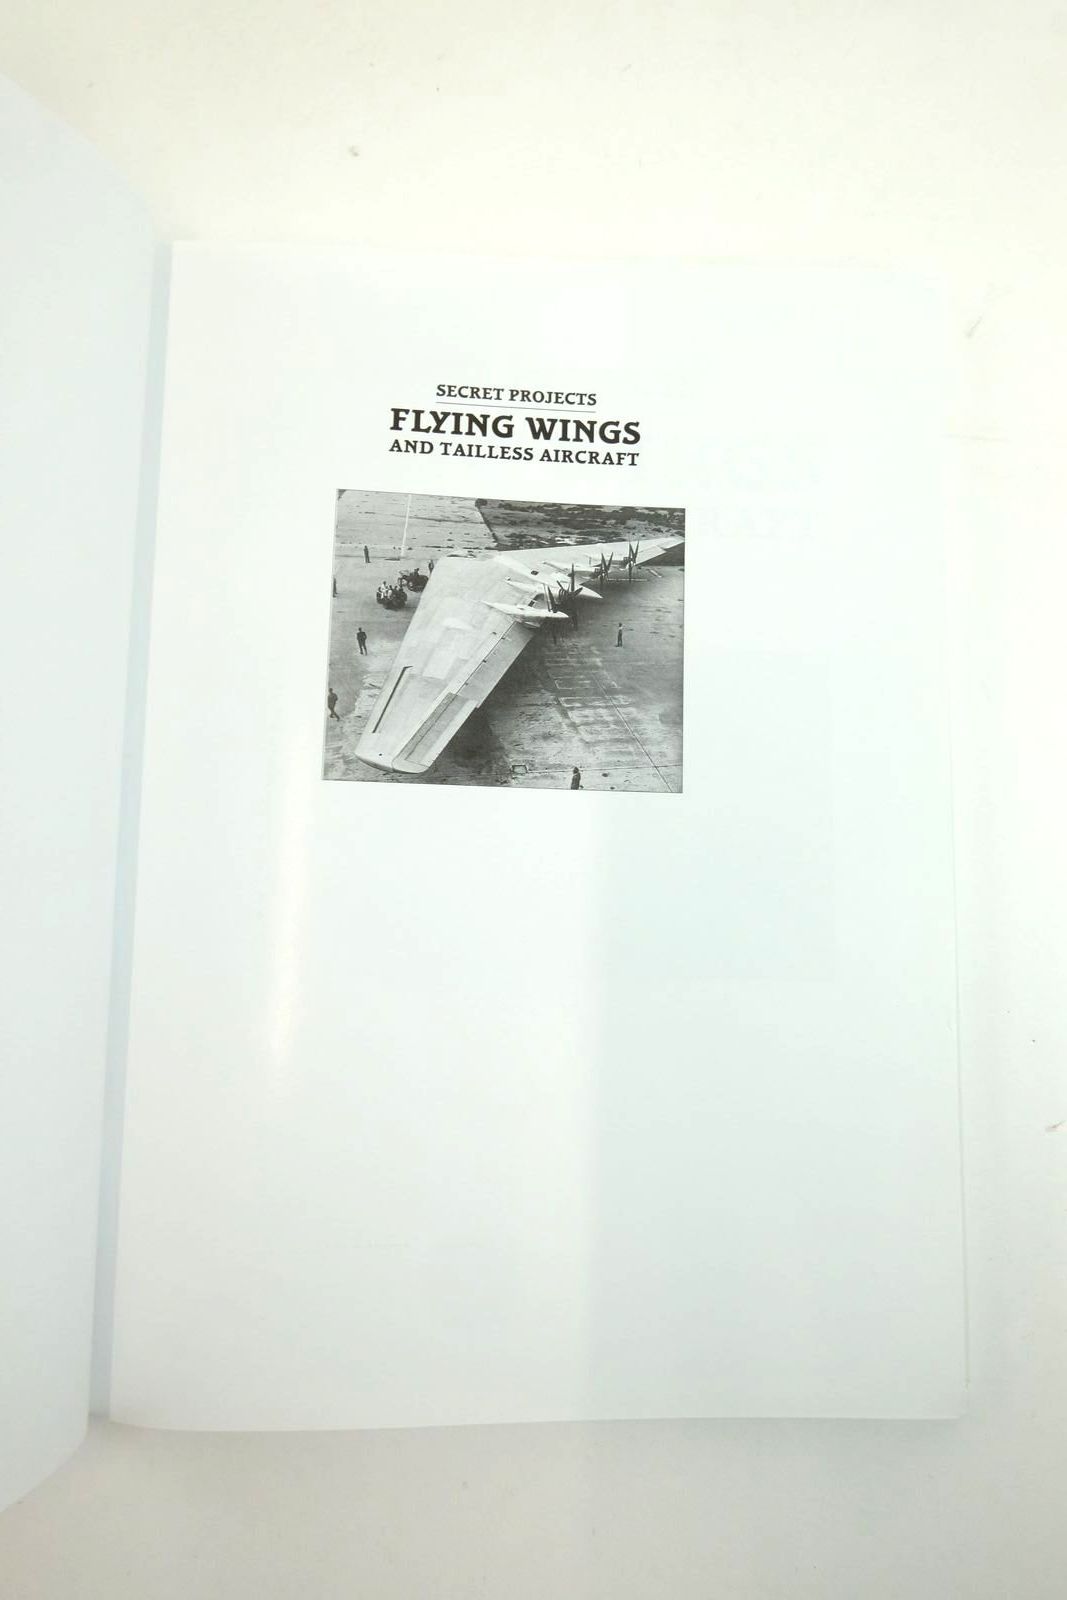 Photo of SECRET PROJECTS FLYING WINGS AND TAILLESS AIRCRAFT written by Rose, Bill published by Midland Publishing (STOCK CODE: 2136206)  for sale by Stella & Rose's Books